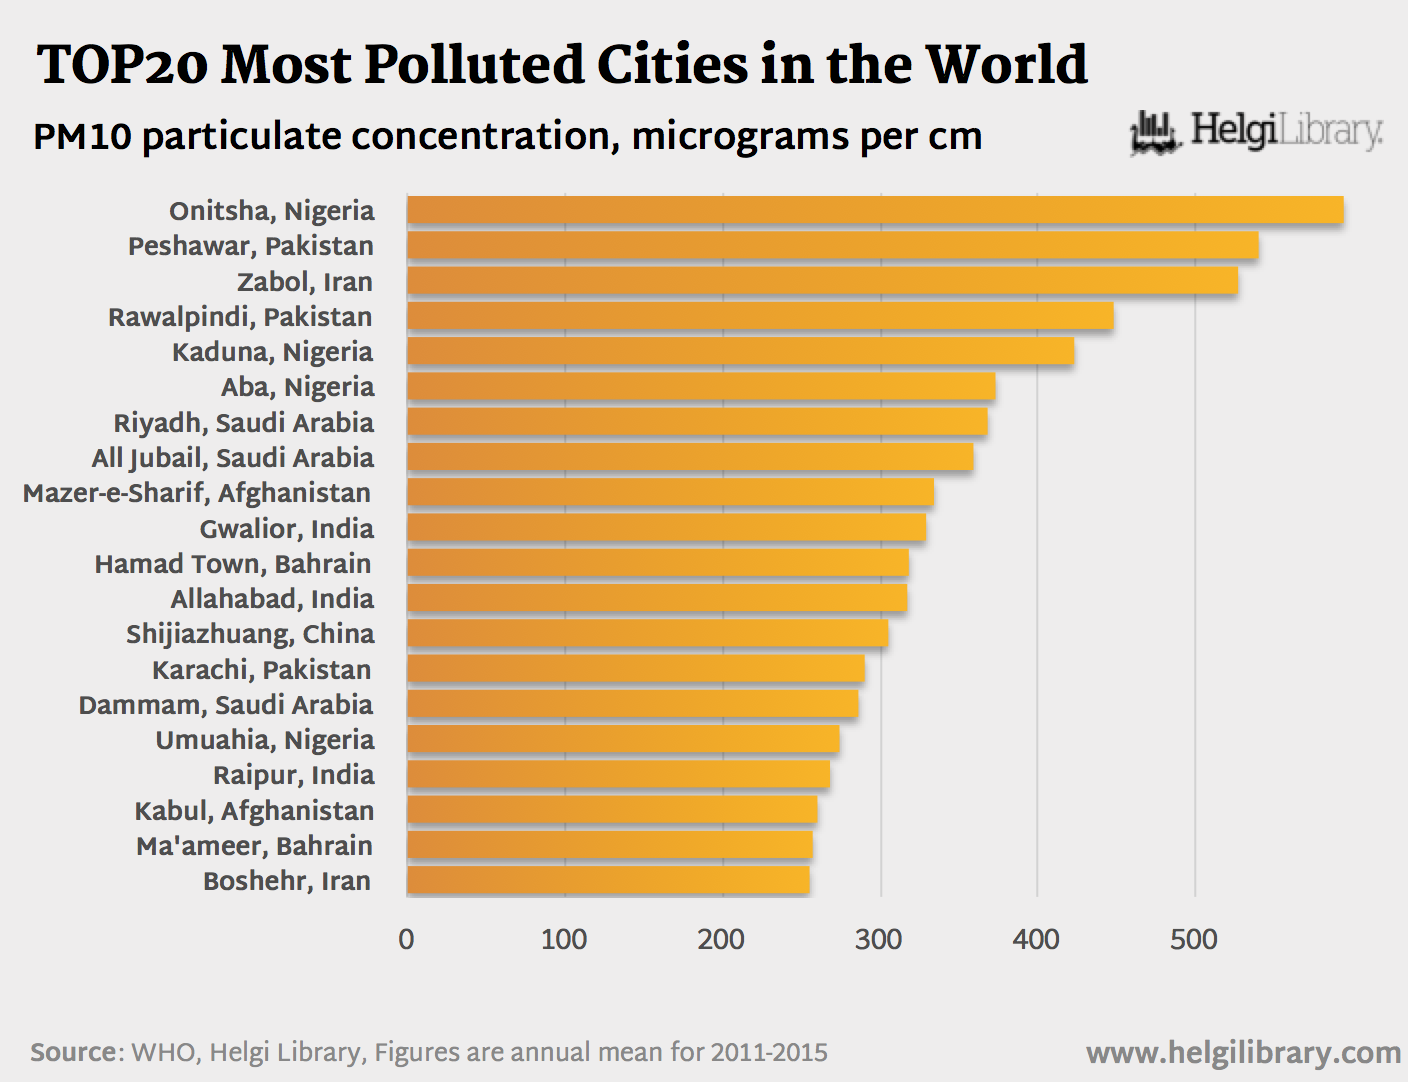 What Are the Most Polluted Cities in the World?